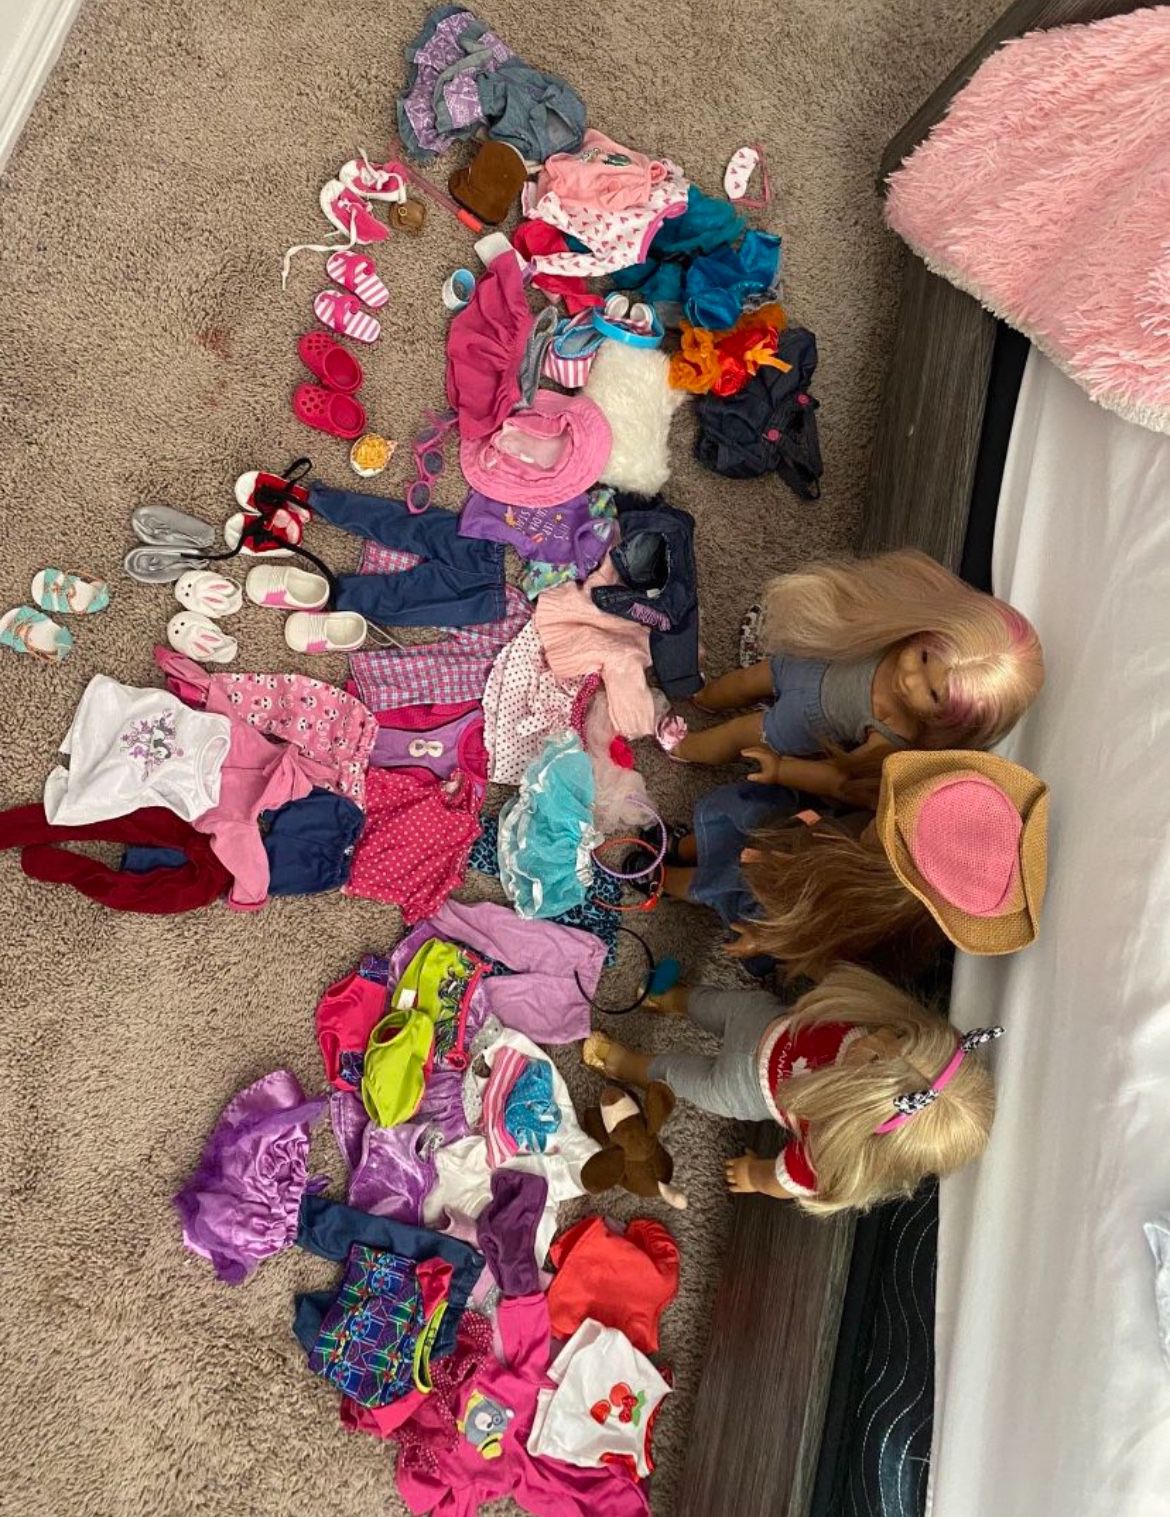 3 American Girl dolls + 30 piece of clothes and accessories